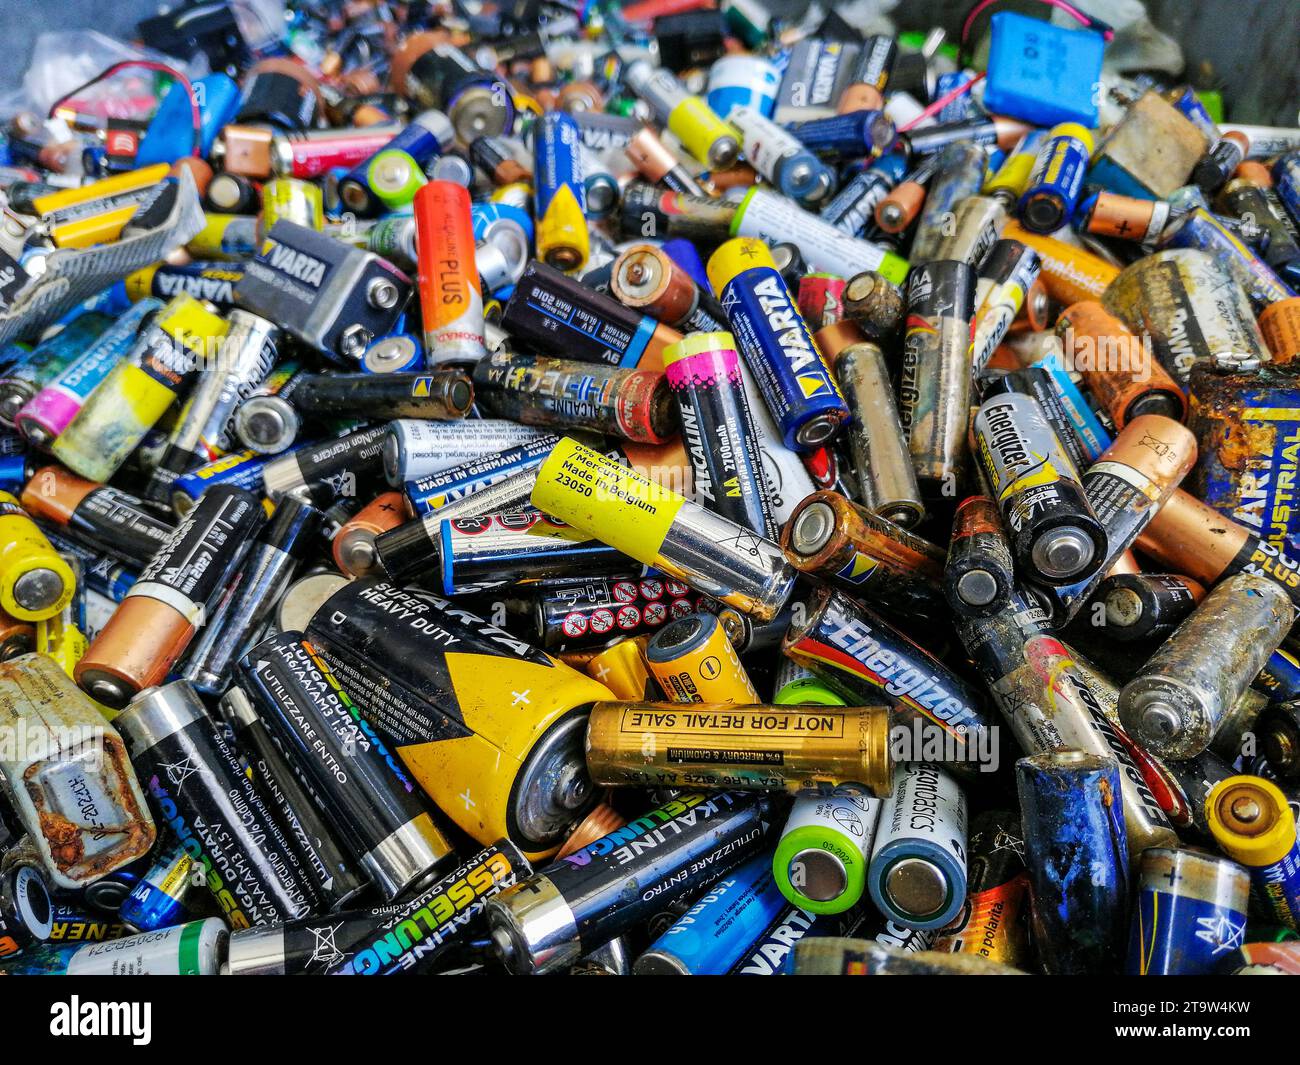 Used Up Batteries Stock Photo